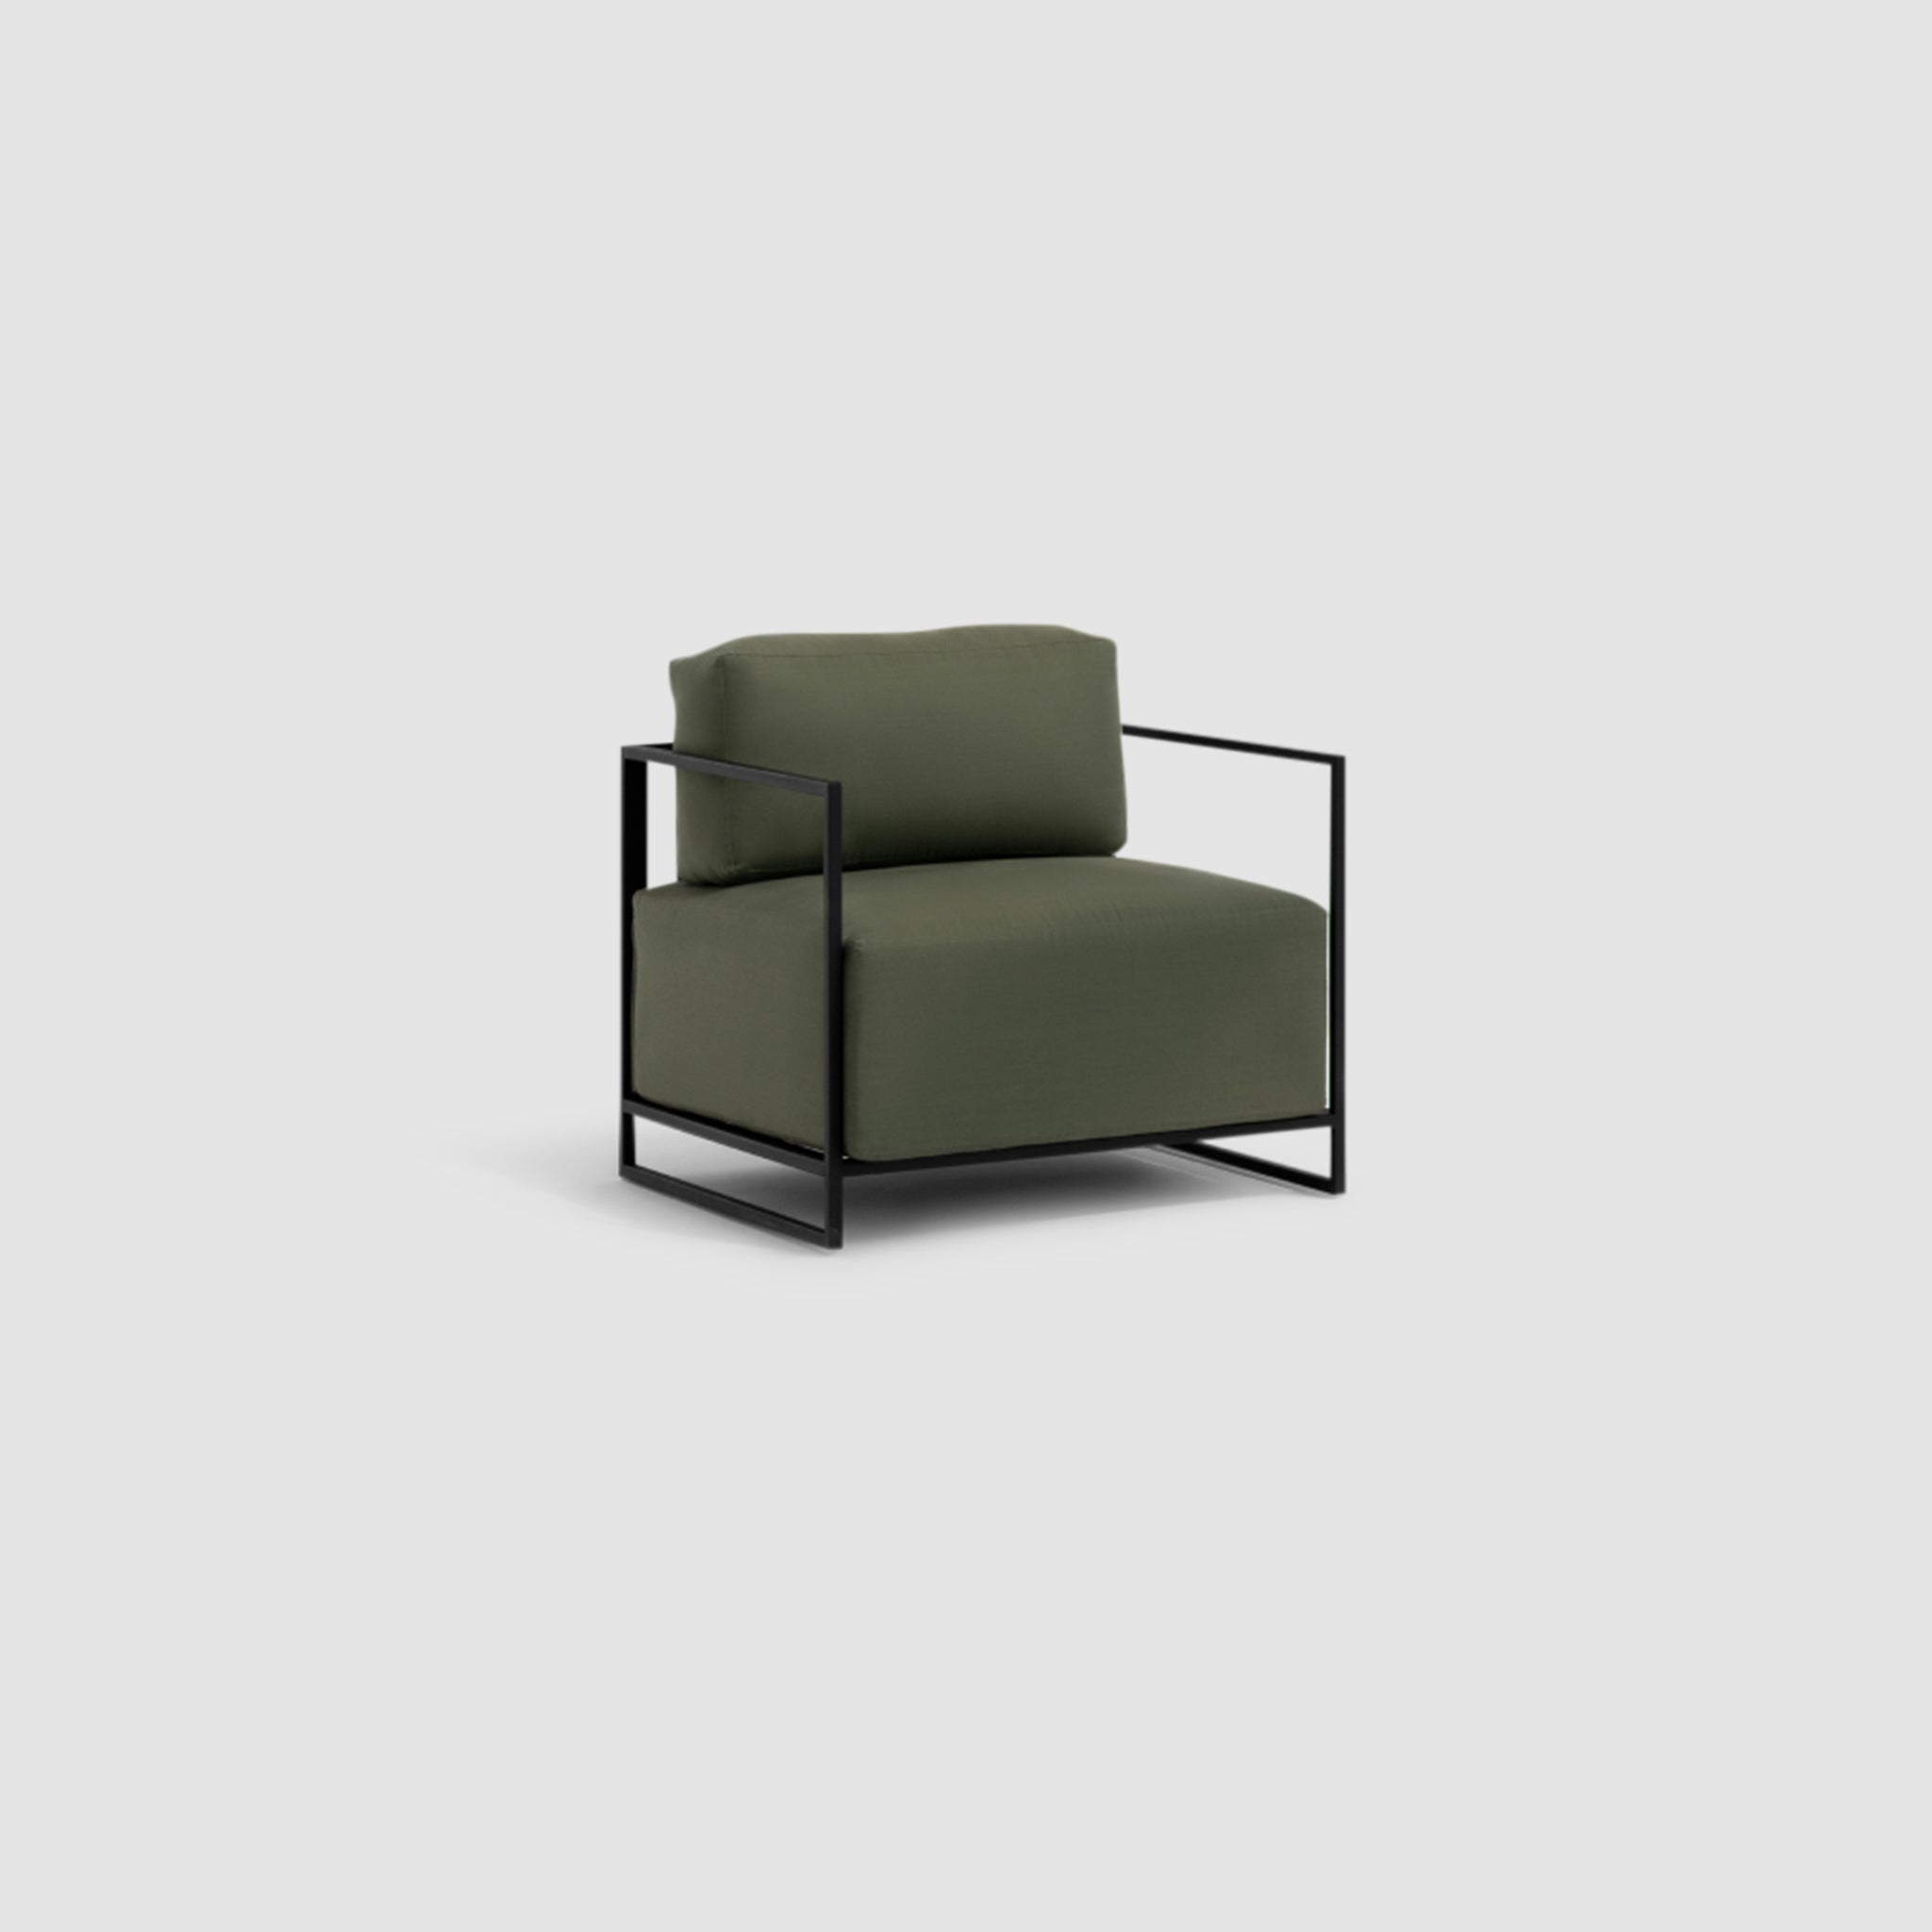 "Sophisticated side view of The Trevor Outdoor Modular Accent Chair featuring white upholstery and black metal frame, complemented by a beige table."